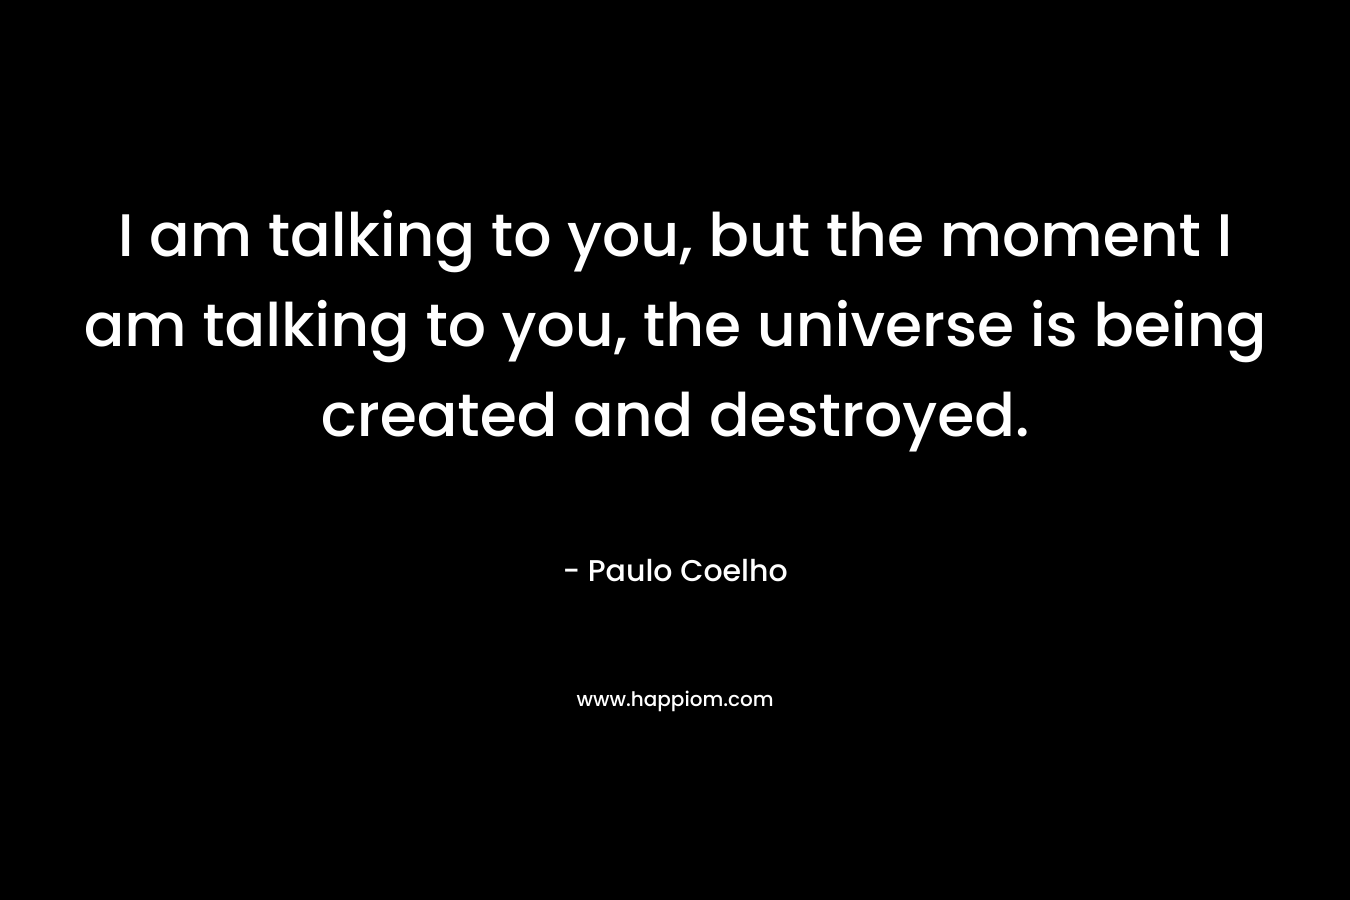 I am talking to you, but the moment I am talking to you, the universe is being created and destroyed.